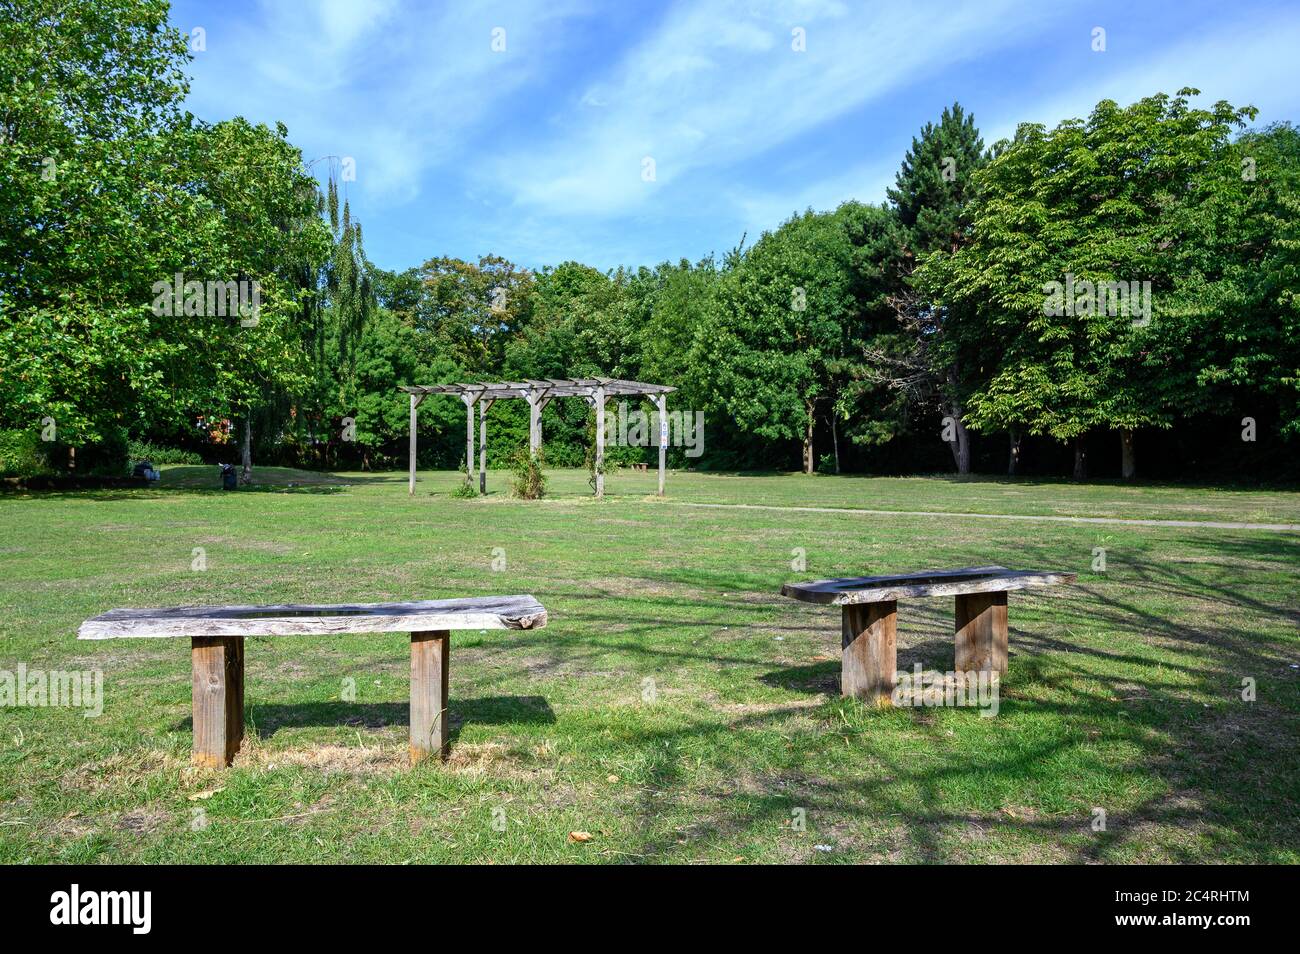 College Green in Bromley (London), Kent. This open space near the center of Bromley has grass, flowers and trees. Photo shows seats and a pergola. Stock Photo